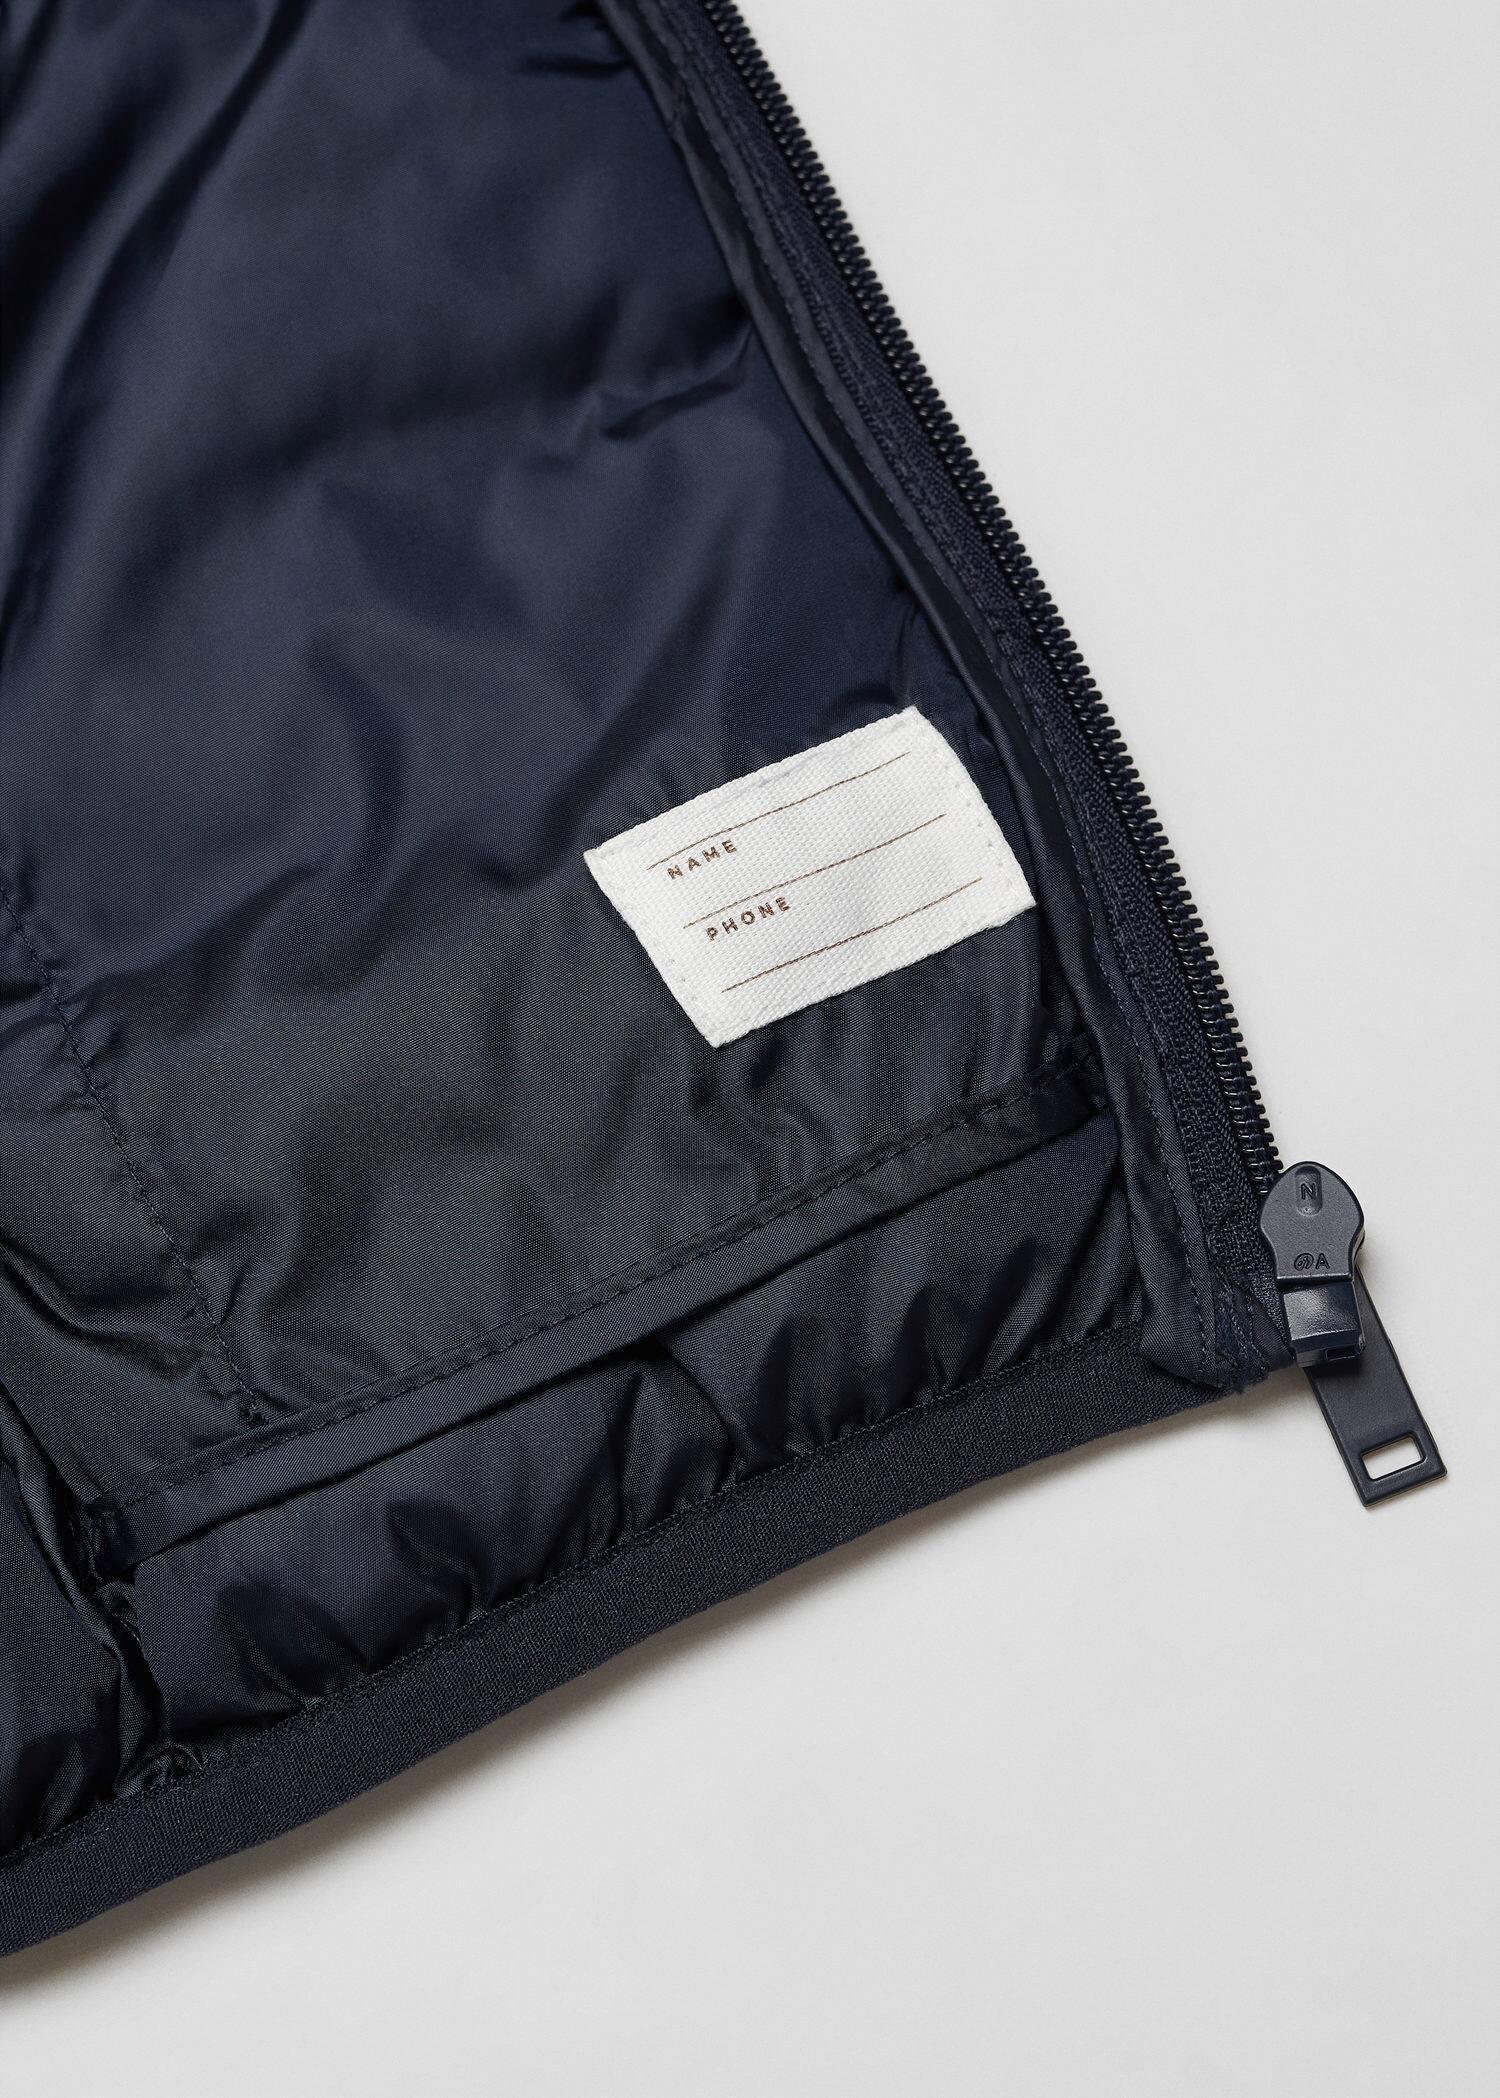 Mango - Navy Quilted Jacket, Kids Boys